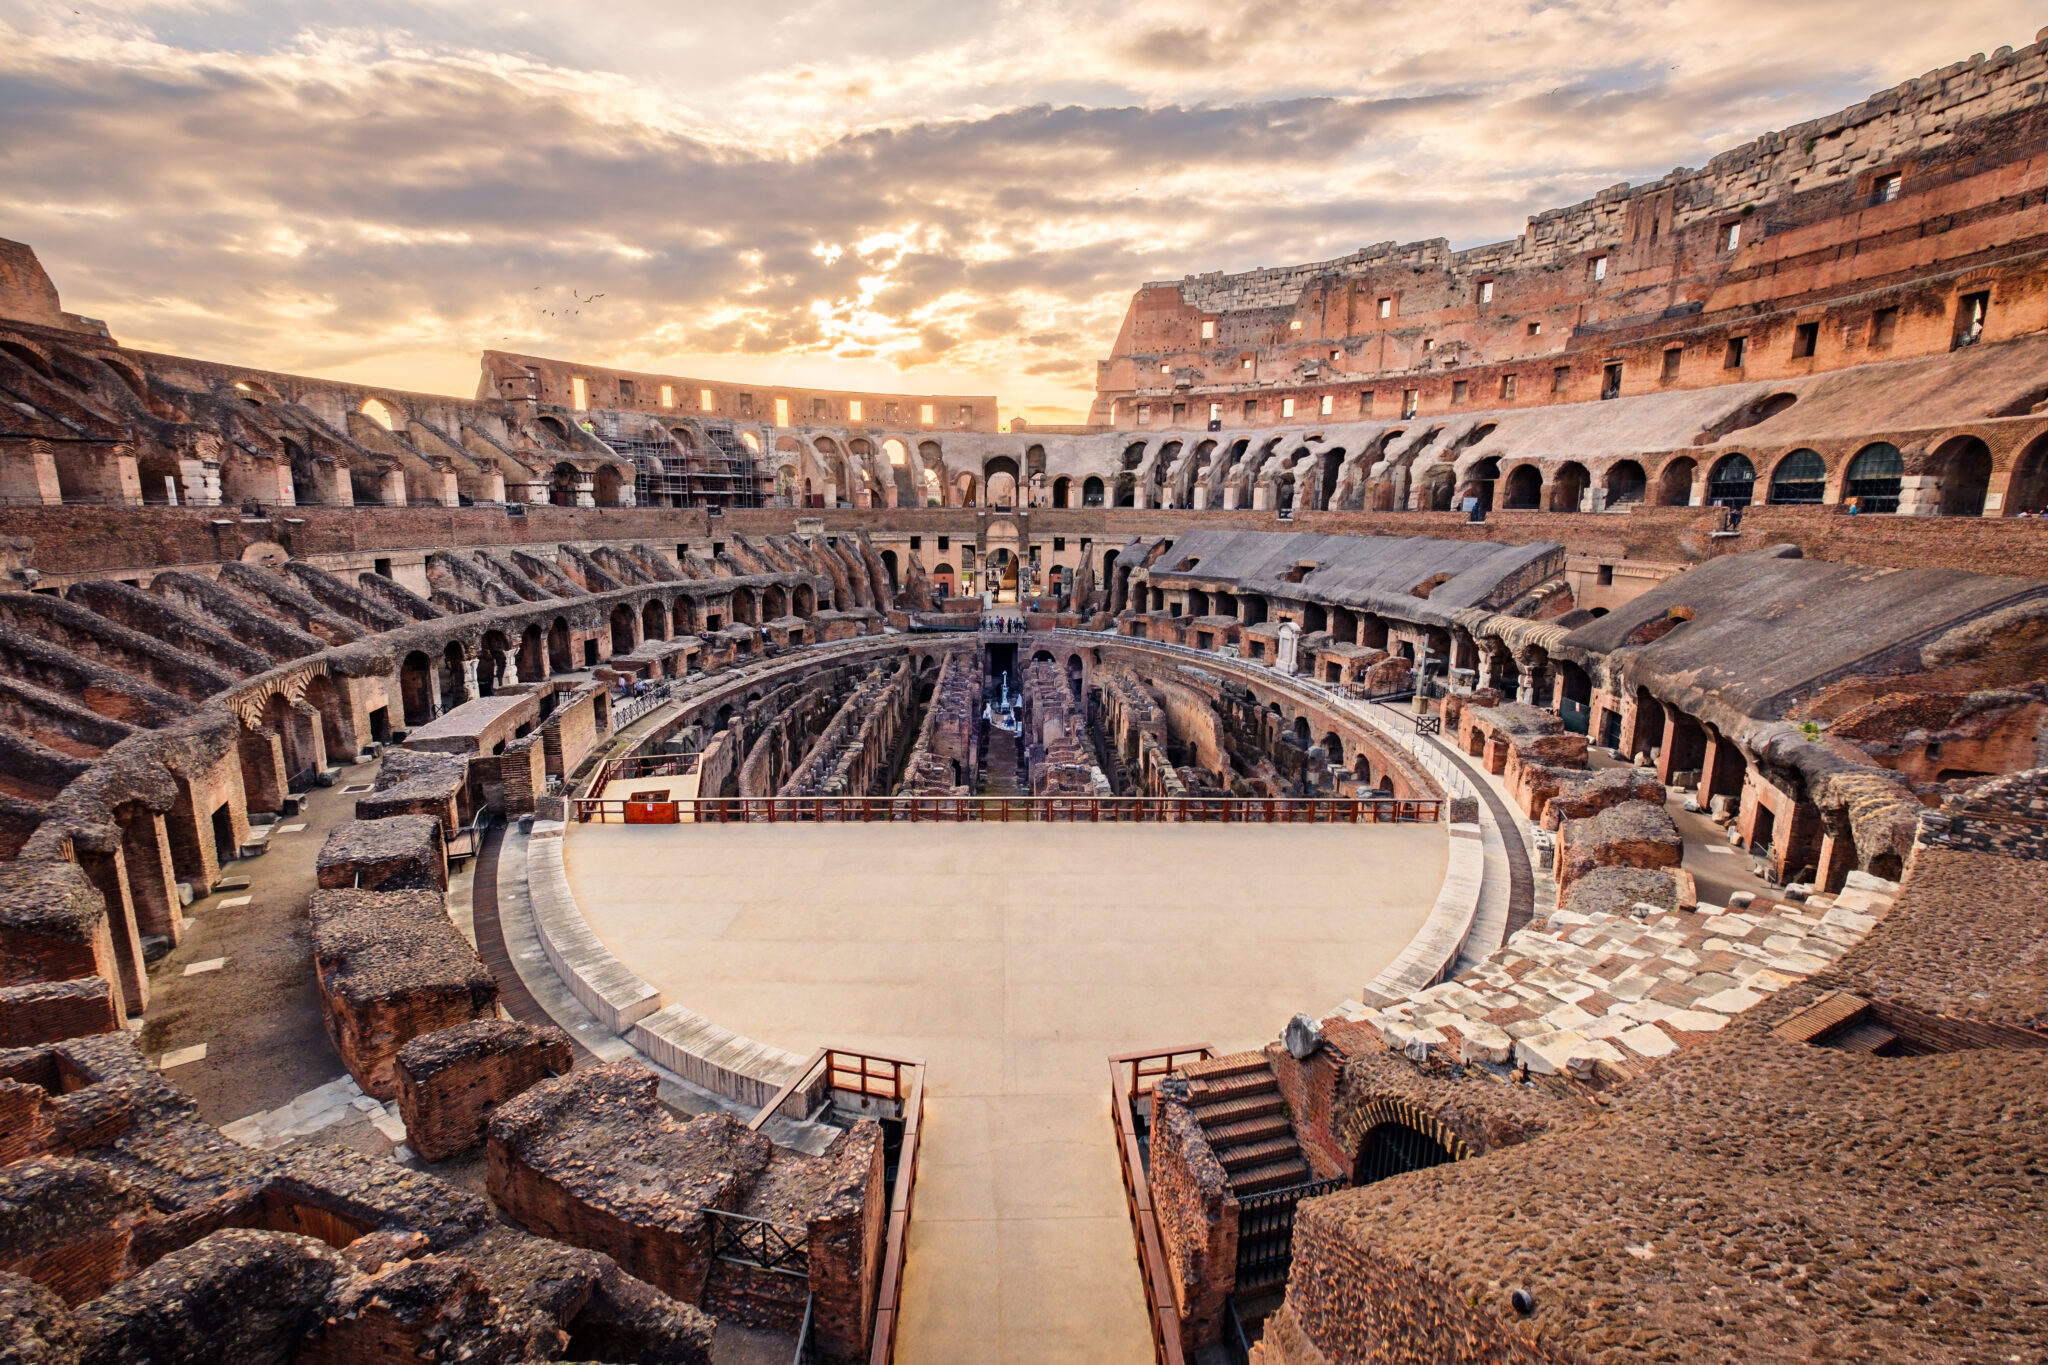   The Colosseum from Roman times hosted gladiatorial battles, naval battles, theatrical performances, and cruel public exe...